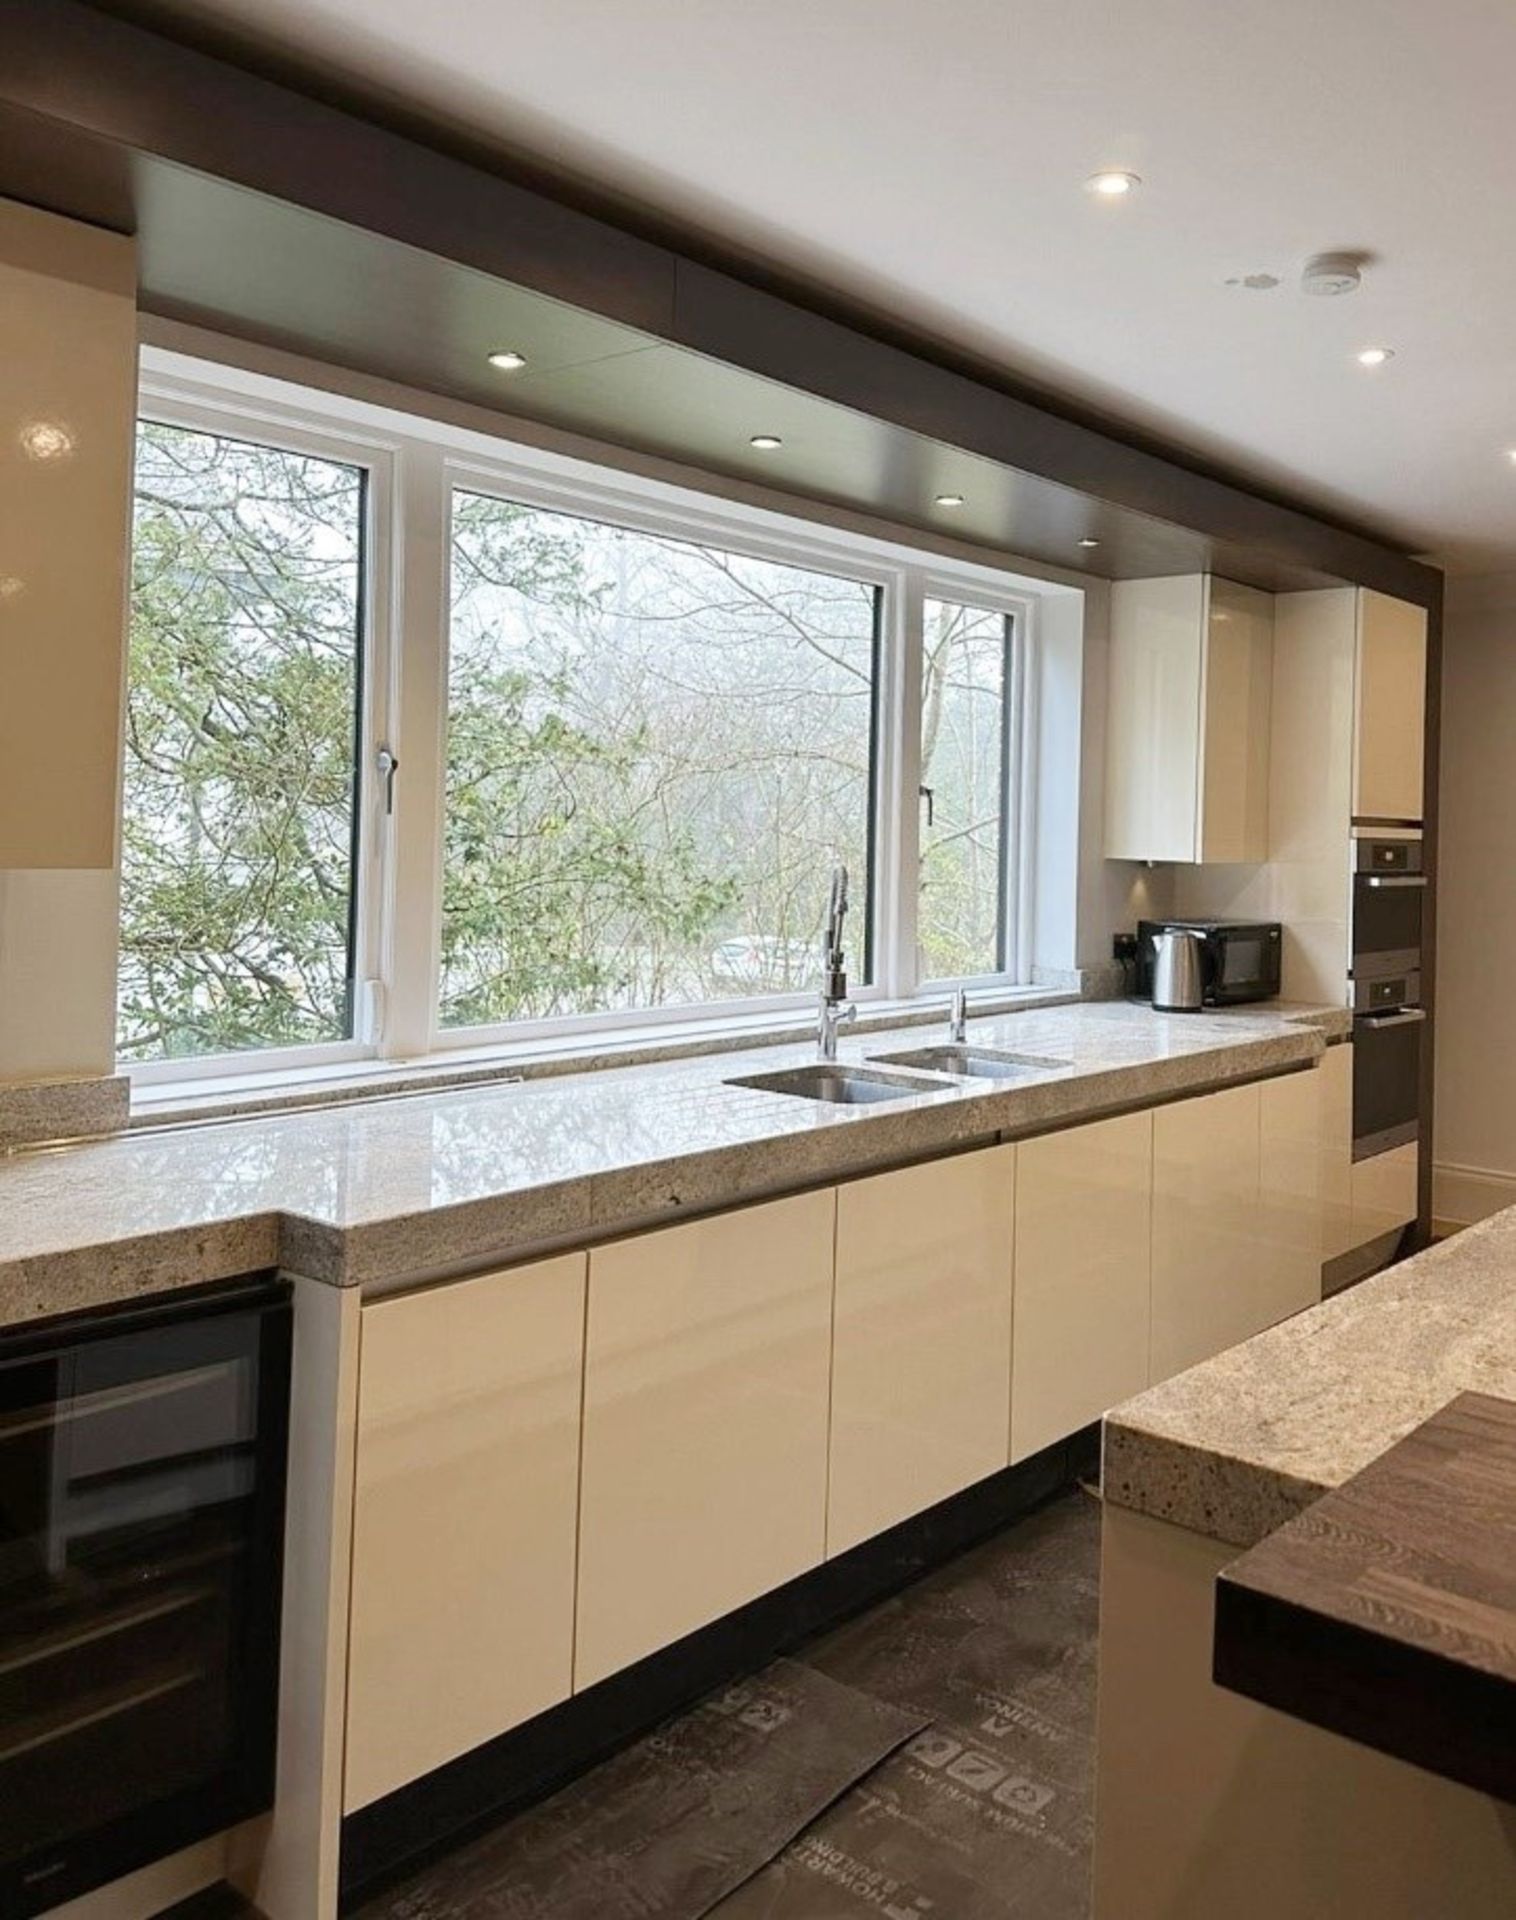 1 x Stunning SIEMATIC Luxury Fitted Handleless Kitchen With Marble Worktops - Original Cost £60,000 - Image 22 of 51